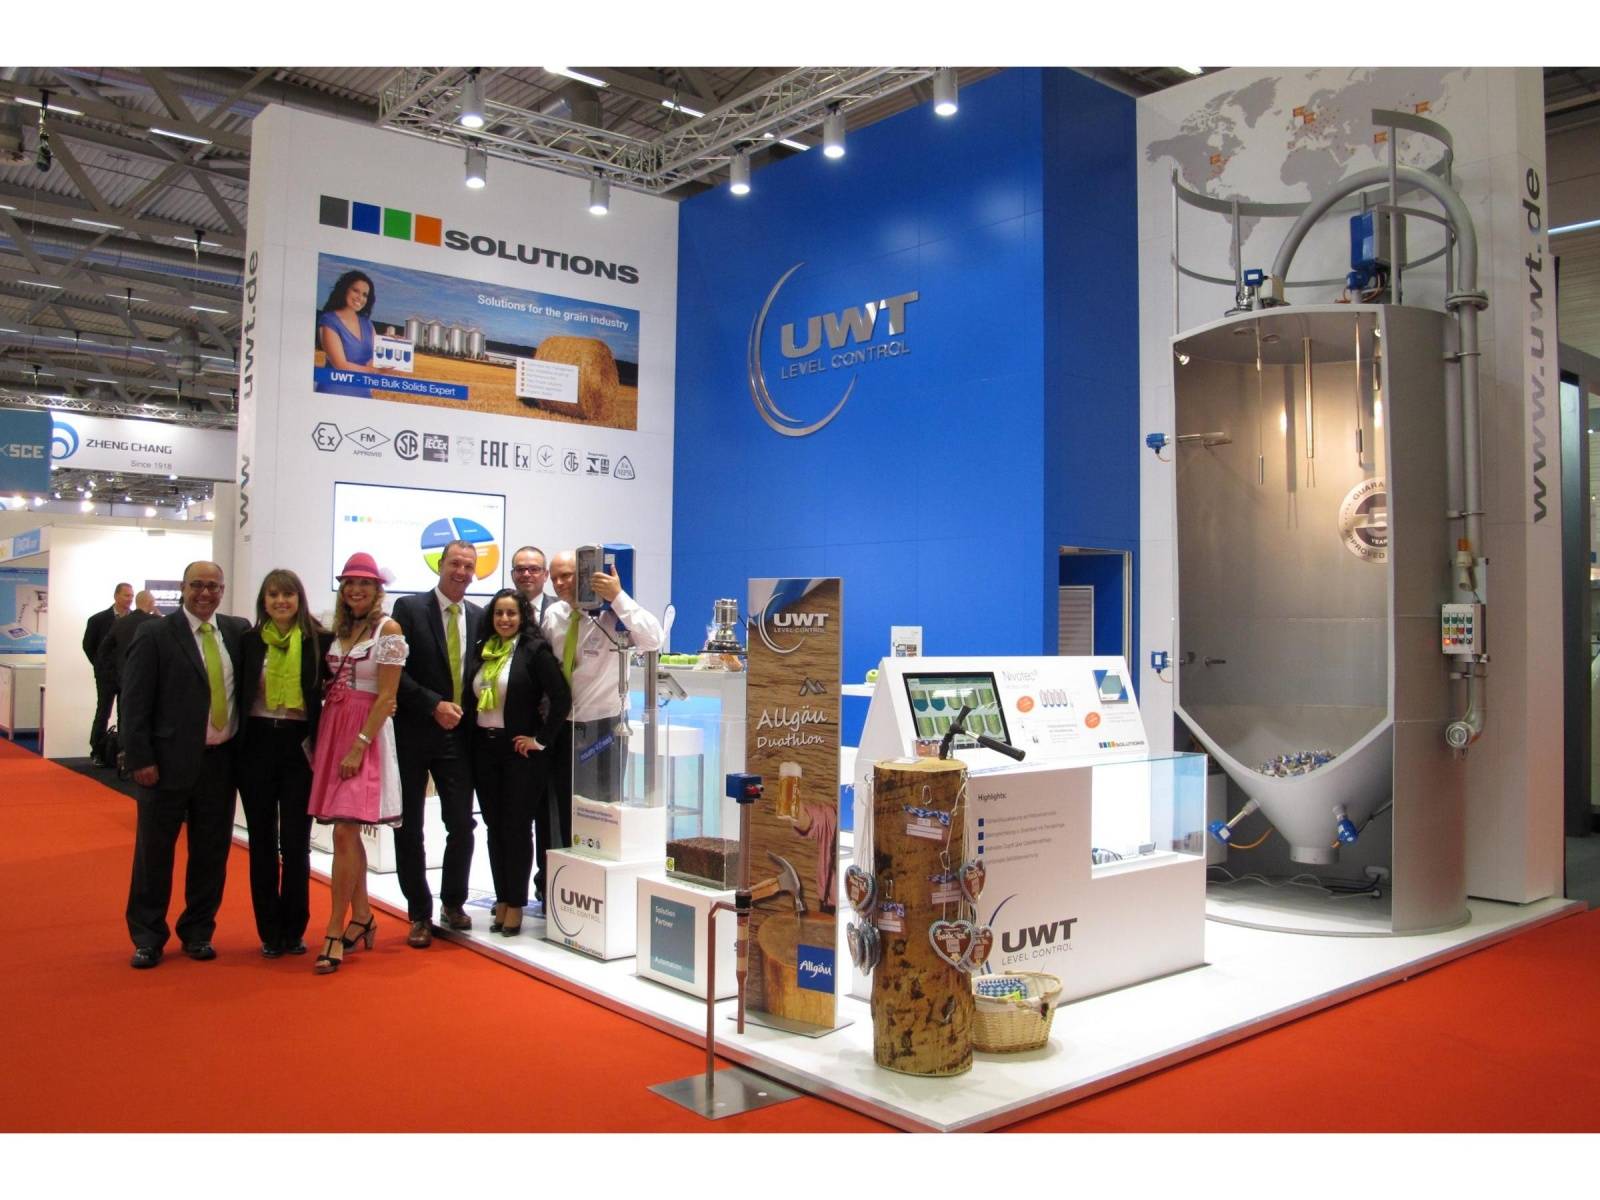 UWT at their booth at Victam in cologne